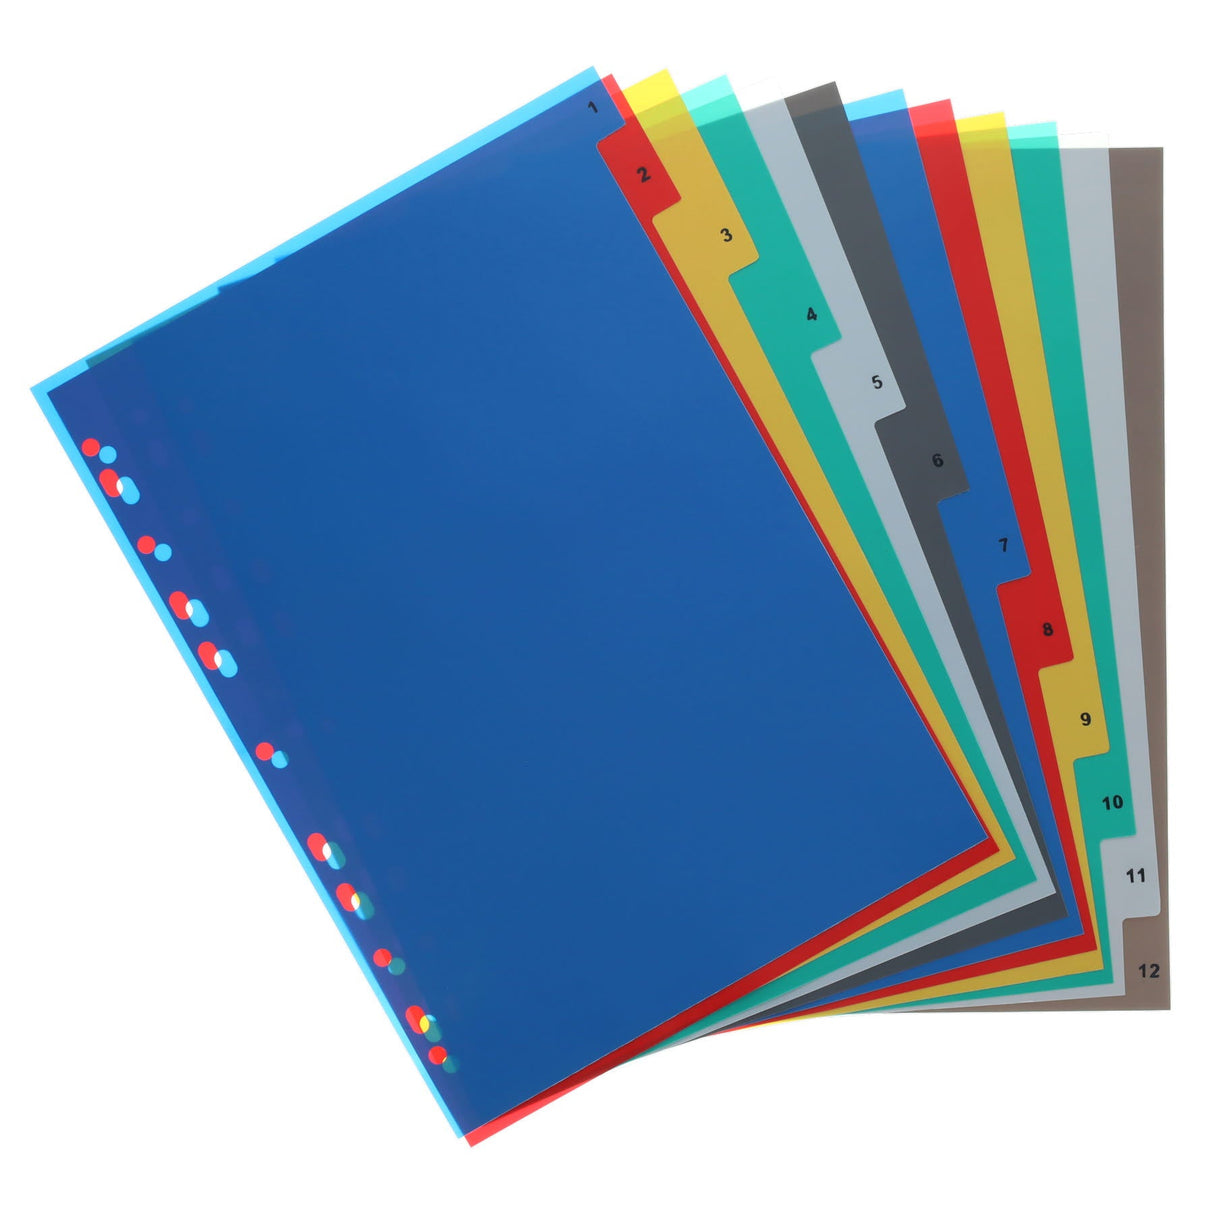 Concept A4 Numbered 1-12 Subject Dividers | Stationery Shop UK